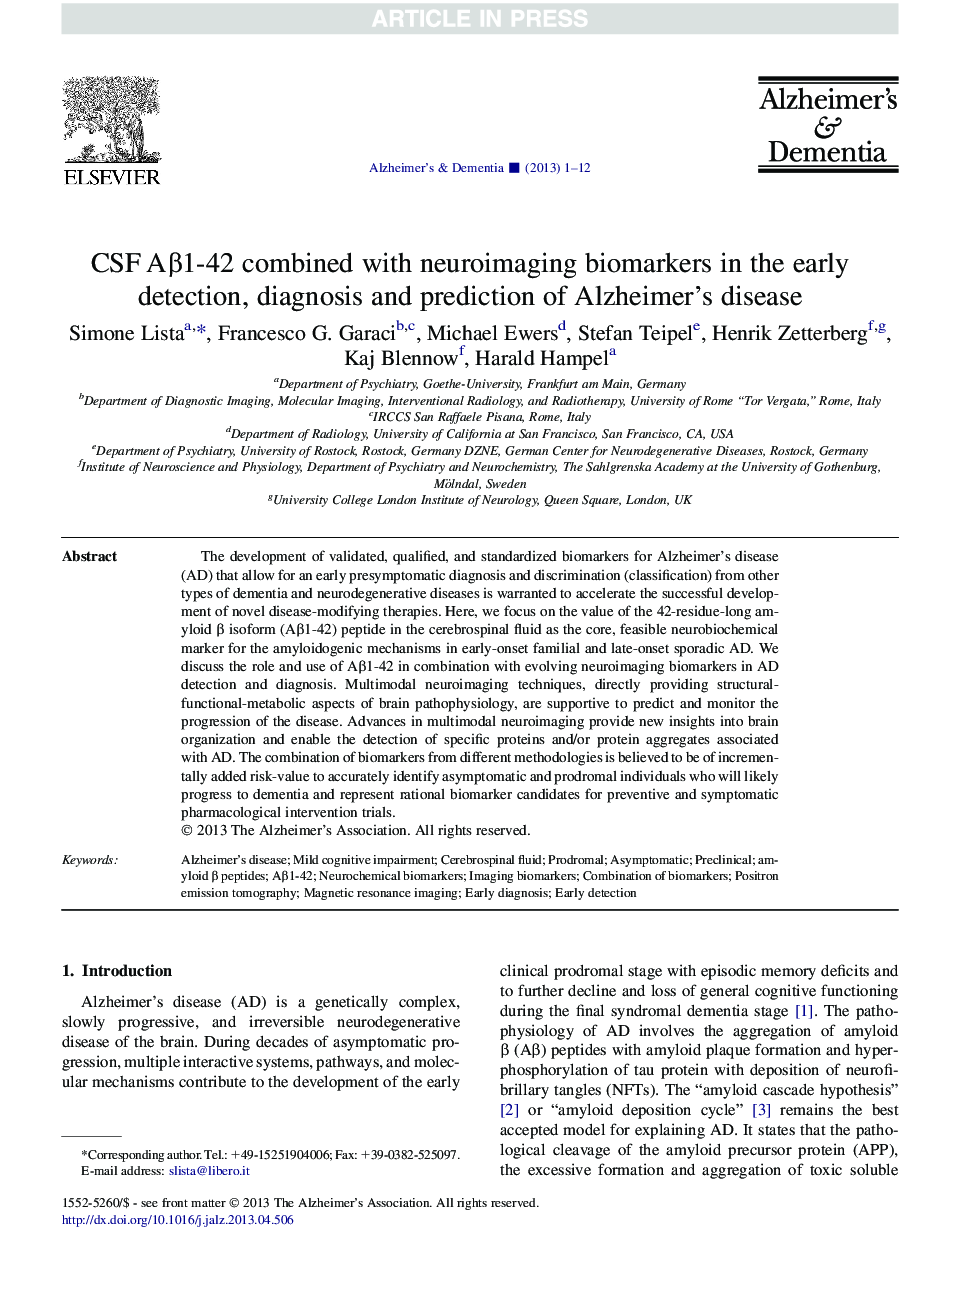 CSF AÎ²1-42 combined with neuroimaging biomarkers in the early detection, diagnosis and prediction of Alzheimer's disease